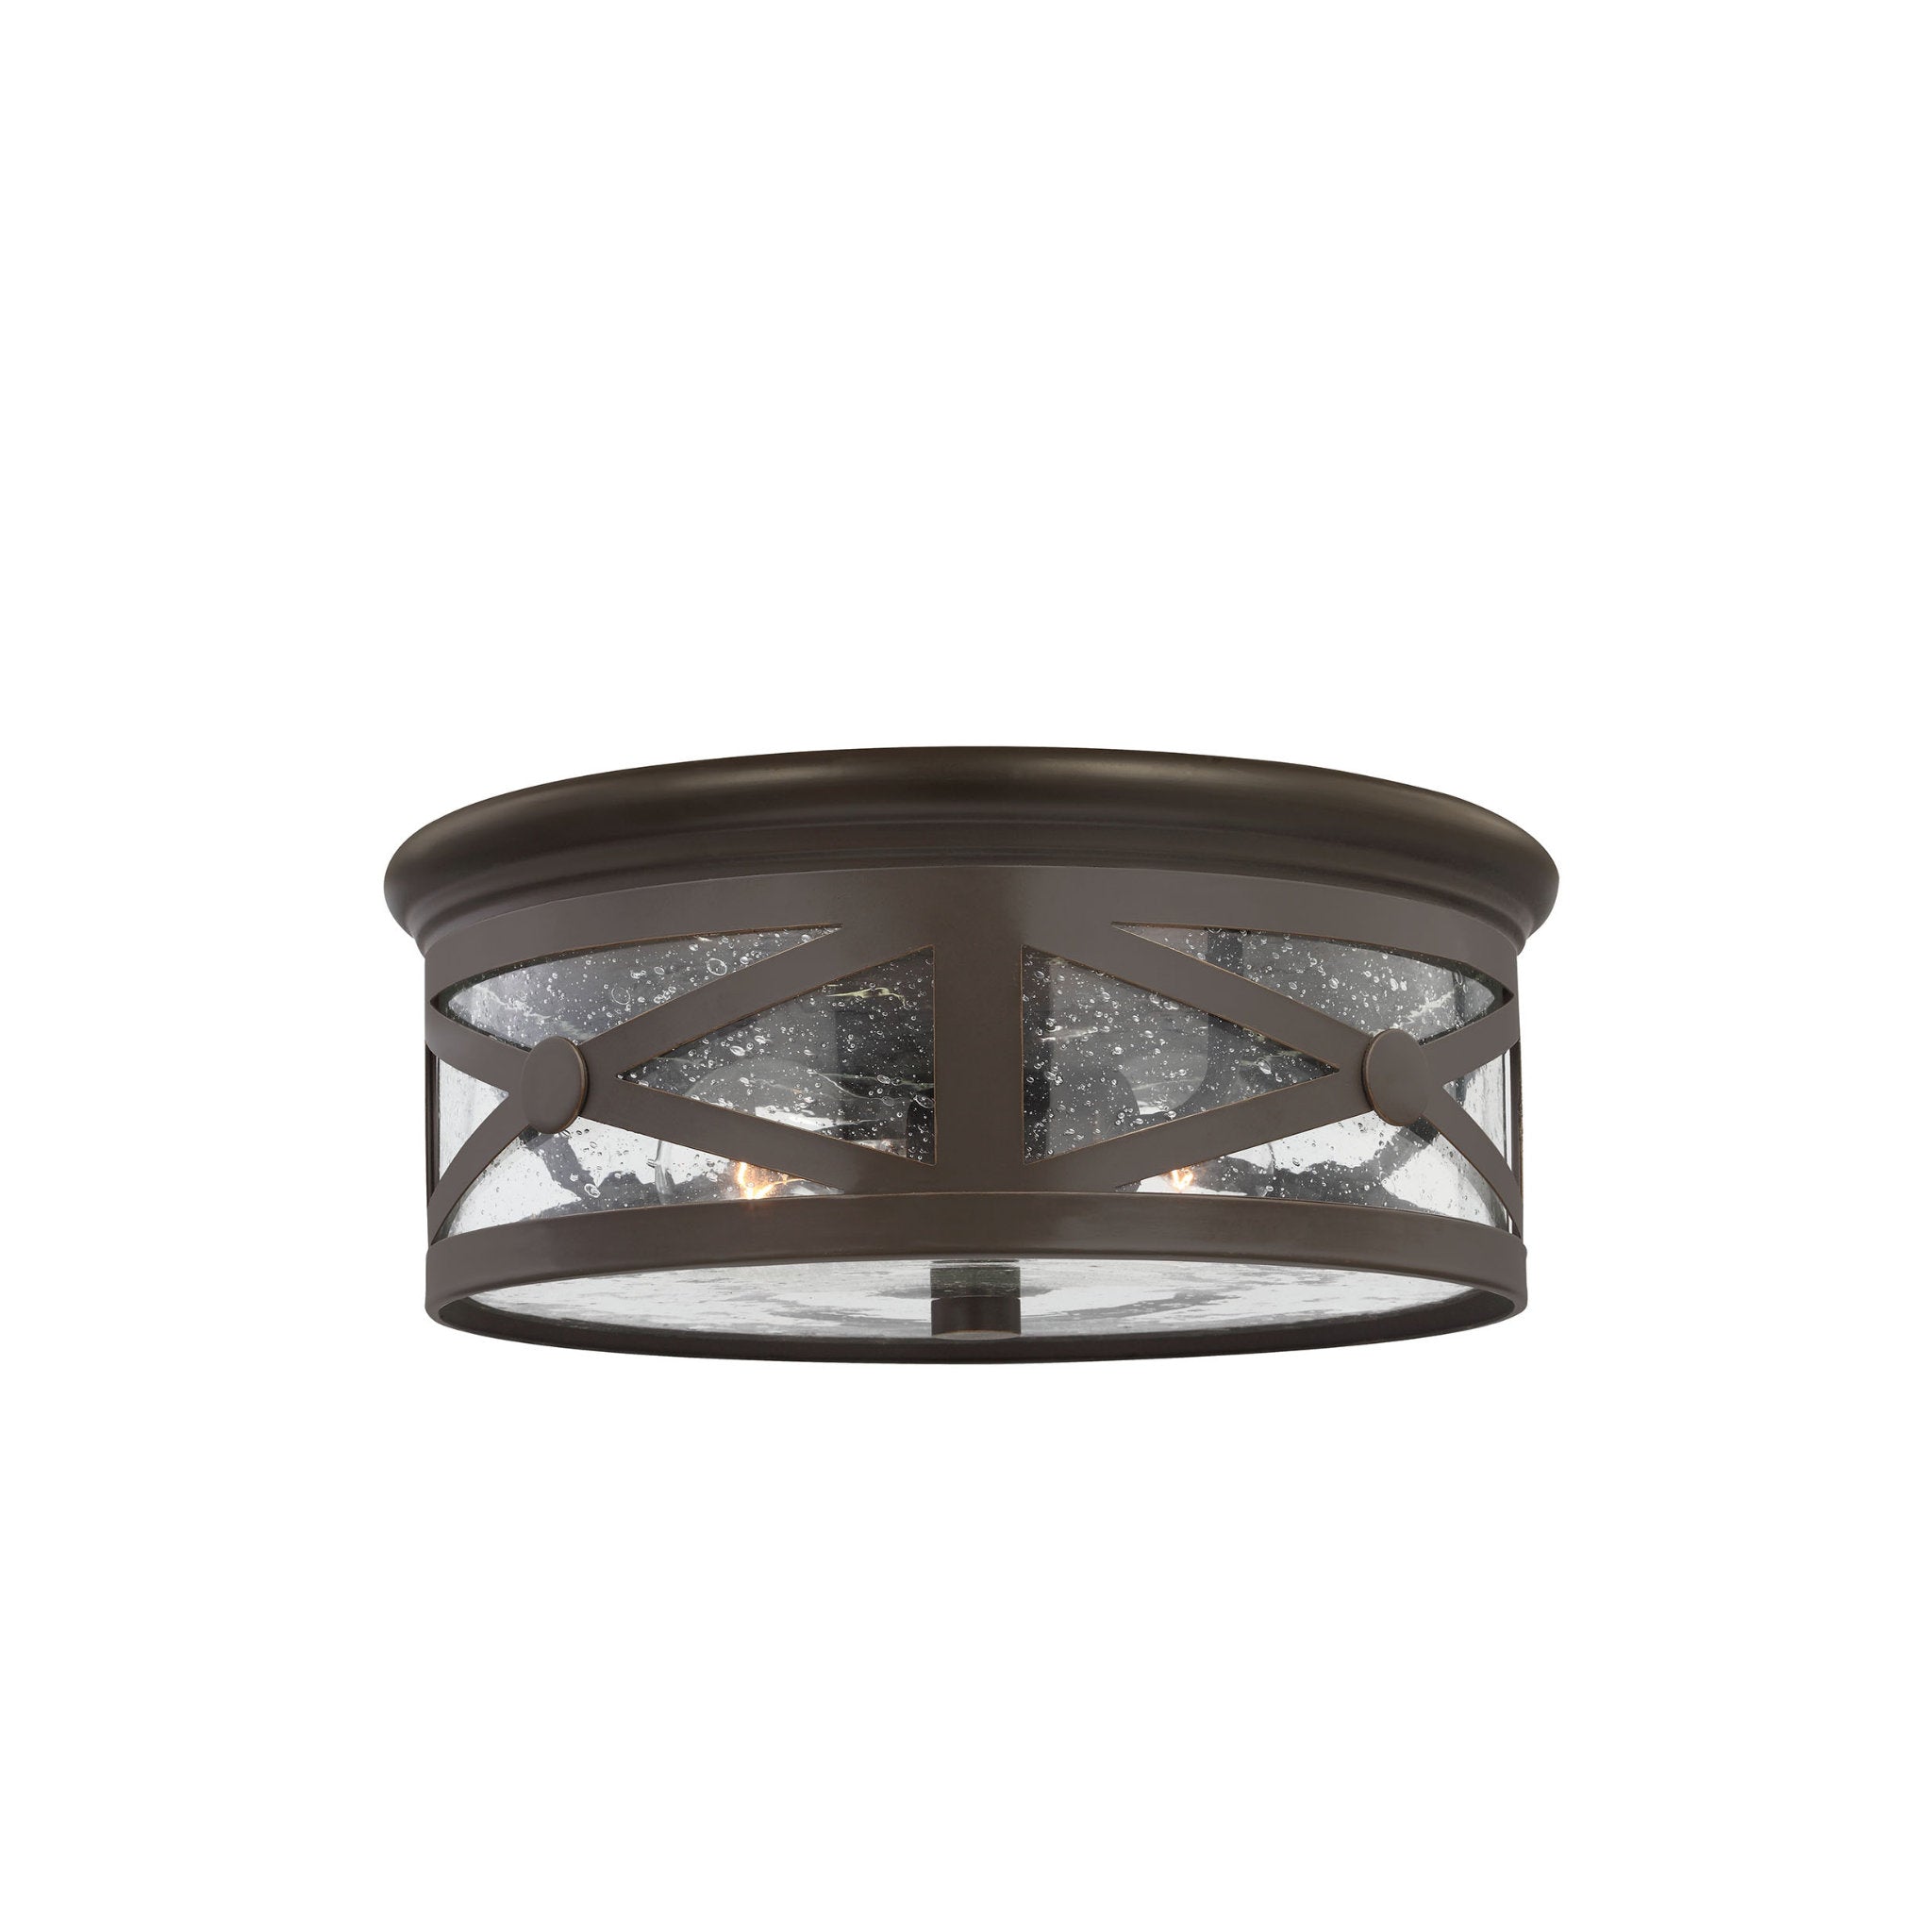 Two Light Outdoor Ceiling Flush Mount Traditional Fixture 5.5" Height Aluminum Round Clear Seeded Shade in Antique Bronze